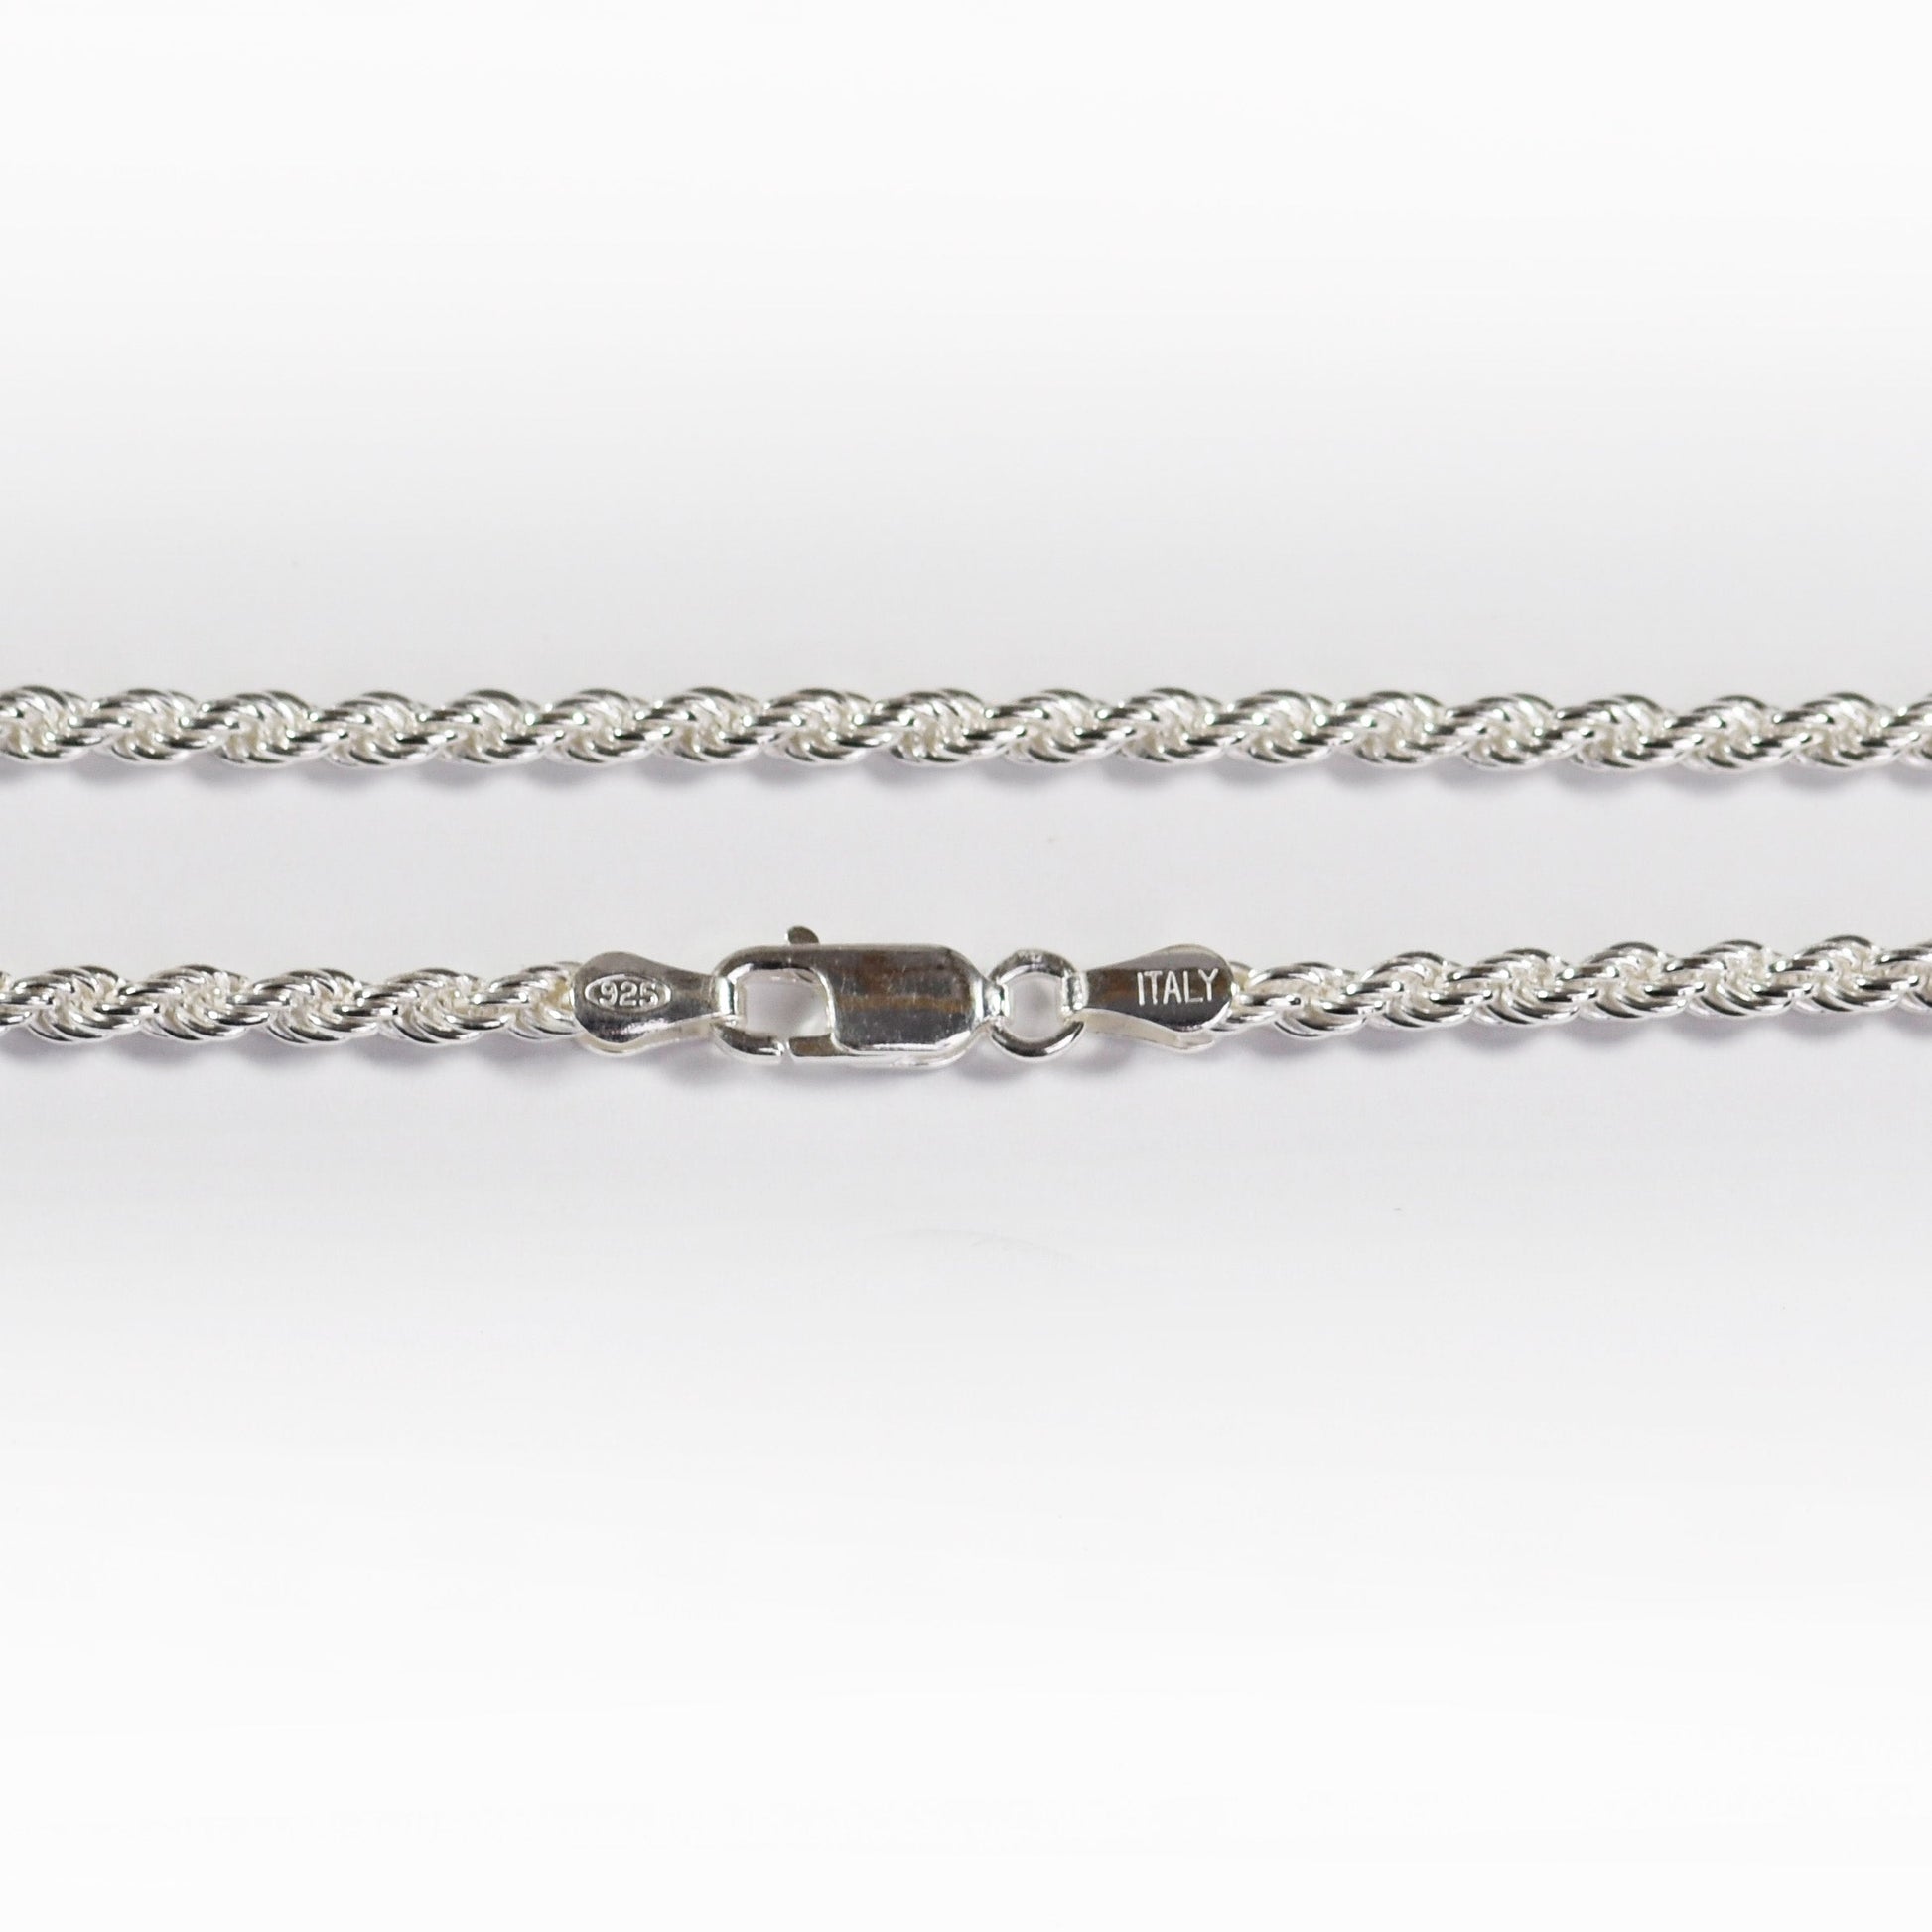 French Rope Necklace - 3 mm - Sterling Silver